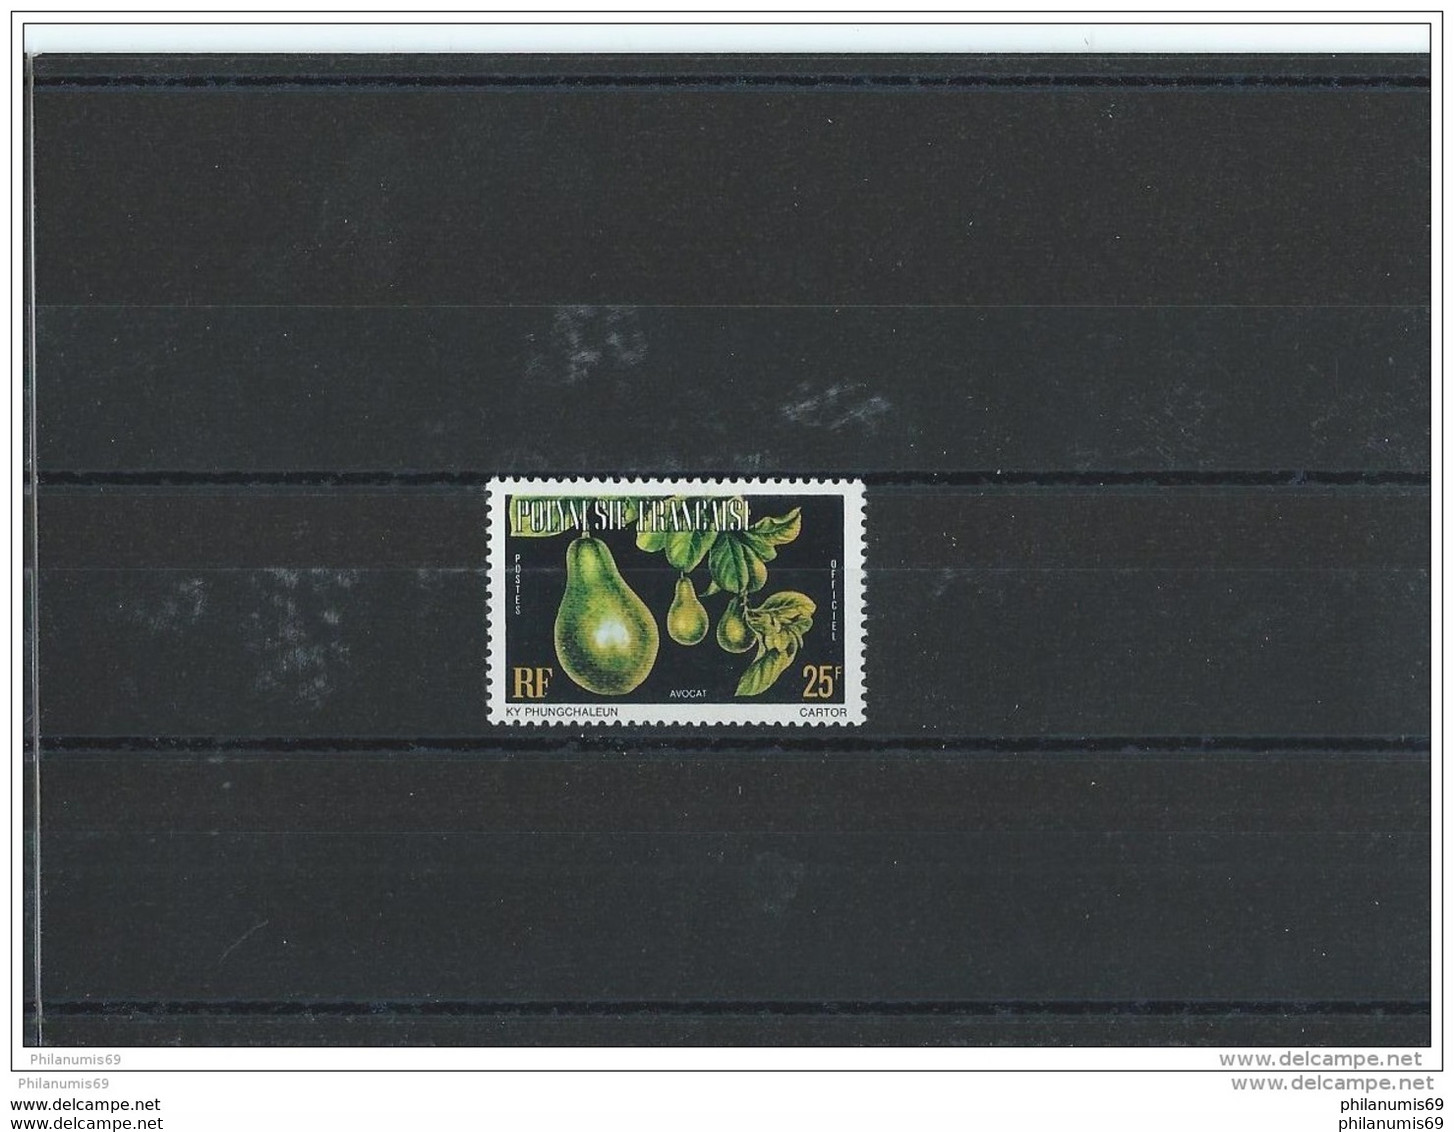 POLYNESIE 1977 - YT TS N° 11(B) NEUF SANS CHARNIERE ** (MNH) GOMME D'ORIGINE LUXE - Oficiales